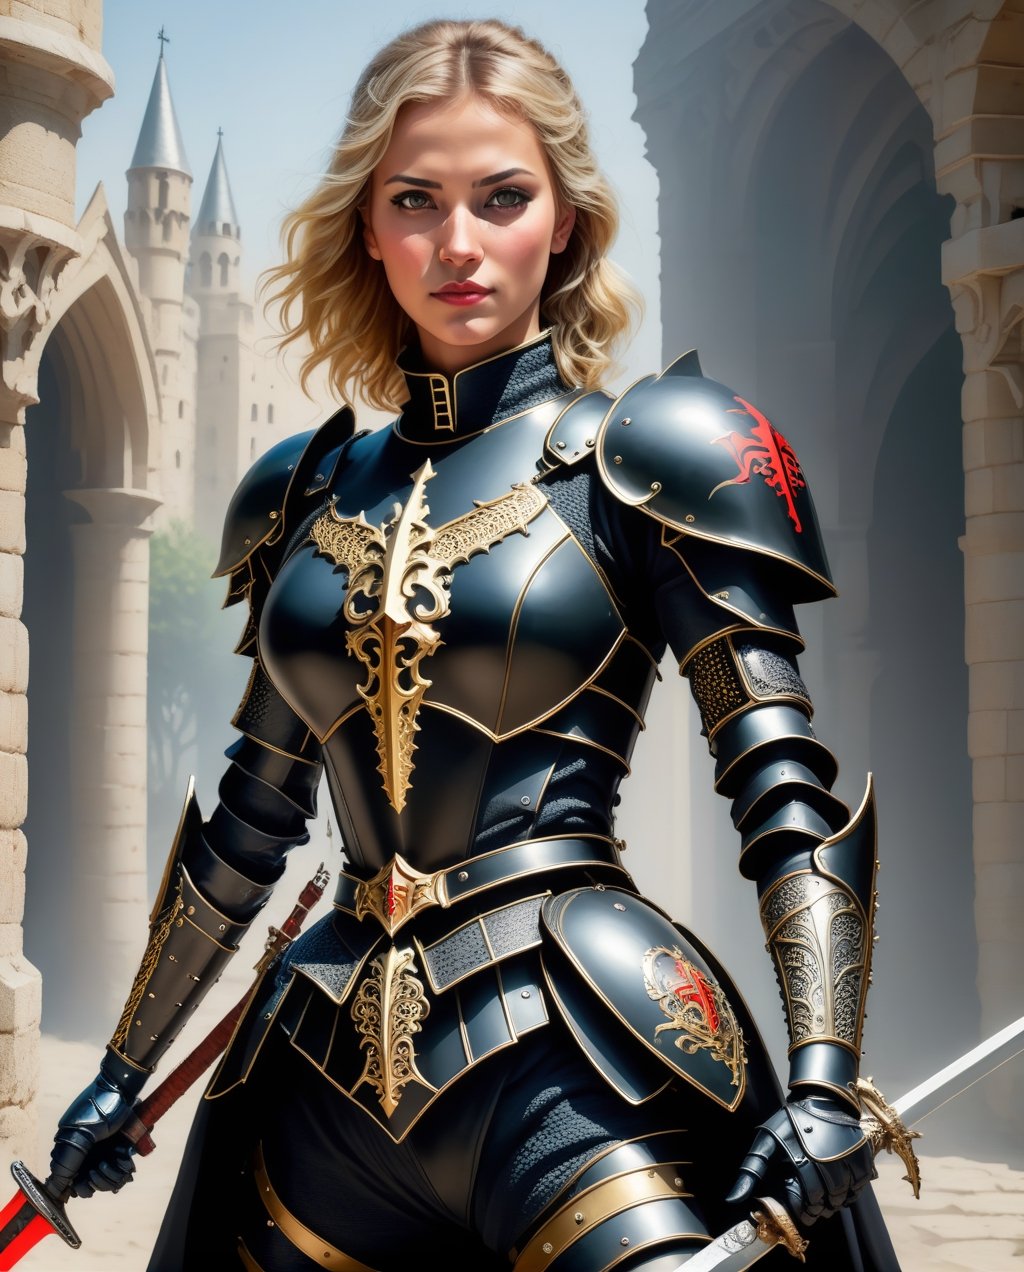 Female Crusader dressed as a black knight Clothes, with heavy belt with knife and sword, 